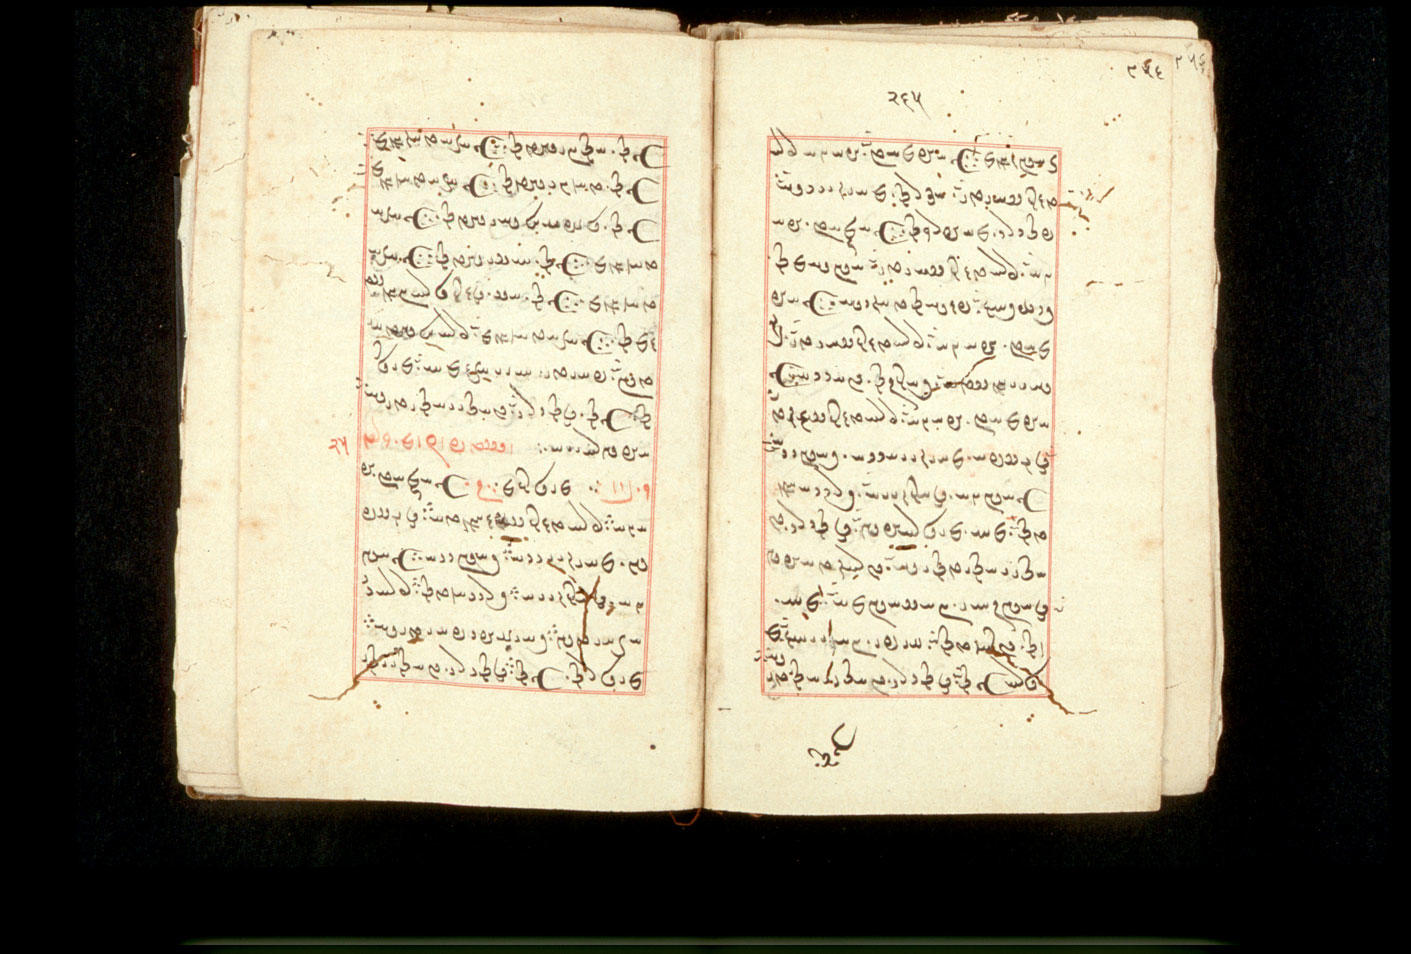 Folios 265v (right) and 266r (left)